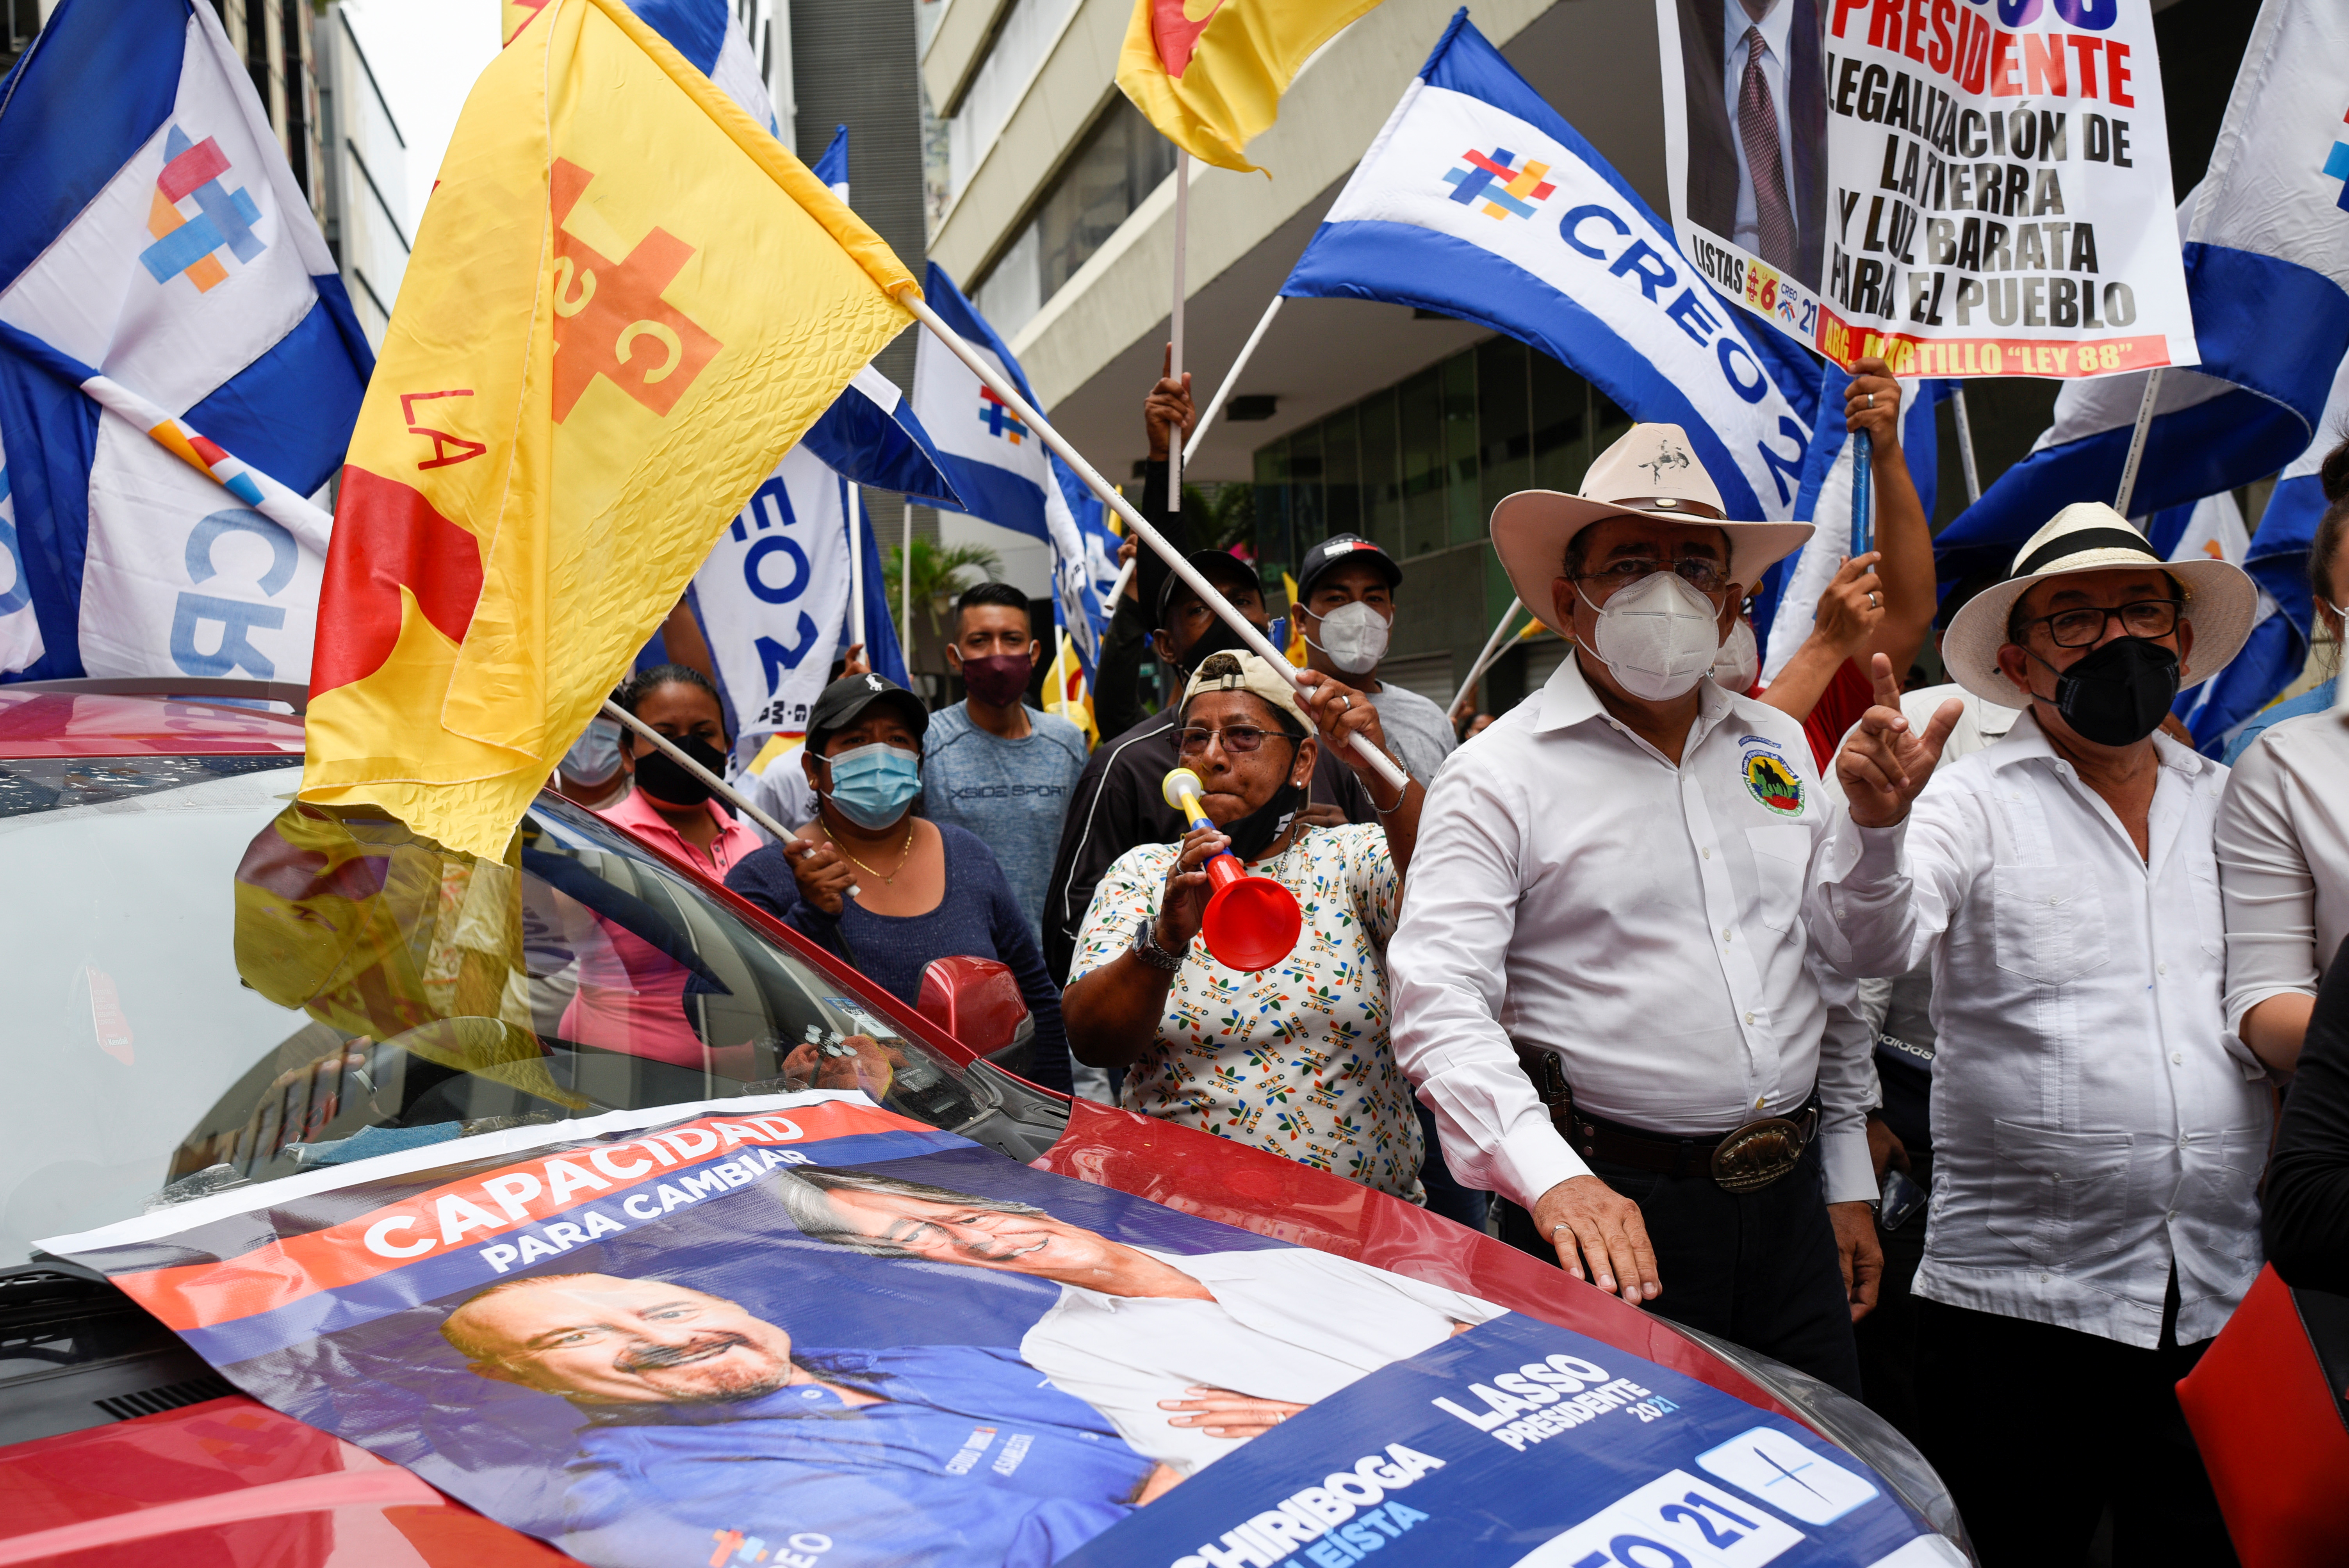 Supporters of Ecuadorean presidential candidate Guillermo Lasso gather before his closing campaign rally in Guayaquil, Ecuador on February 4 [Santiago Arcos/Reuters]